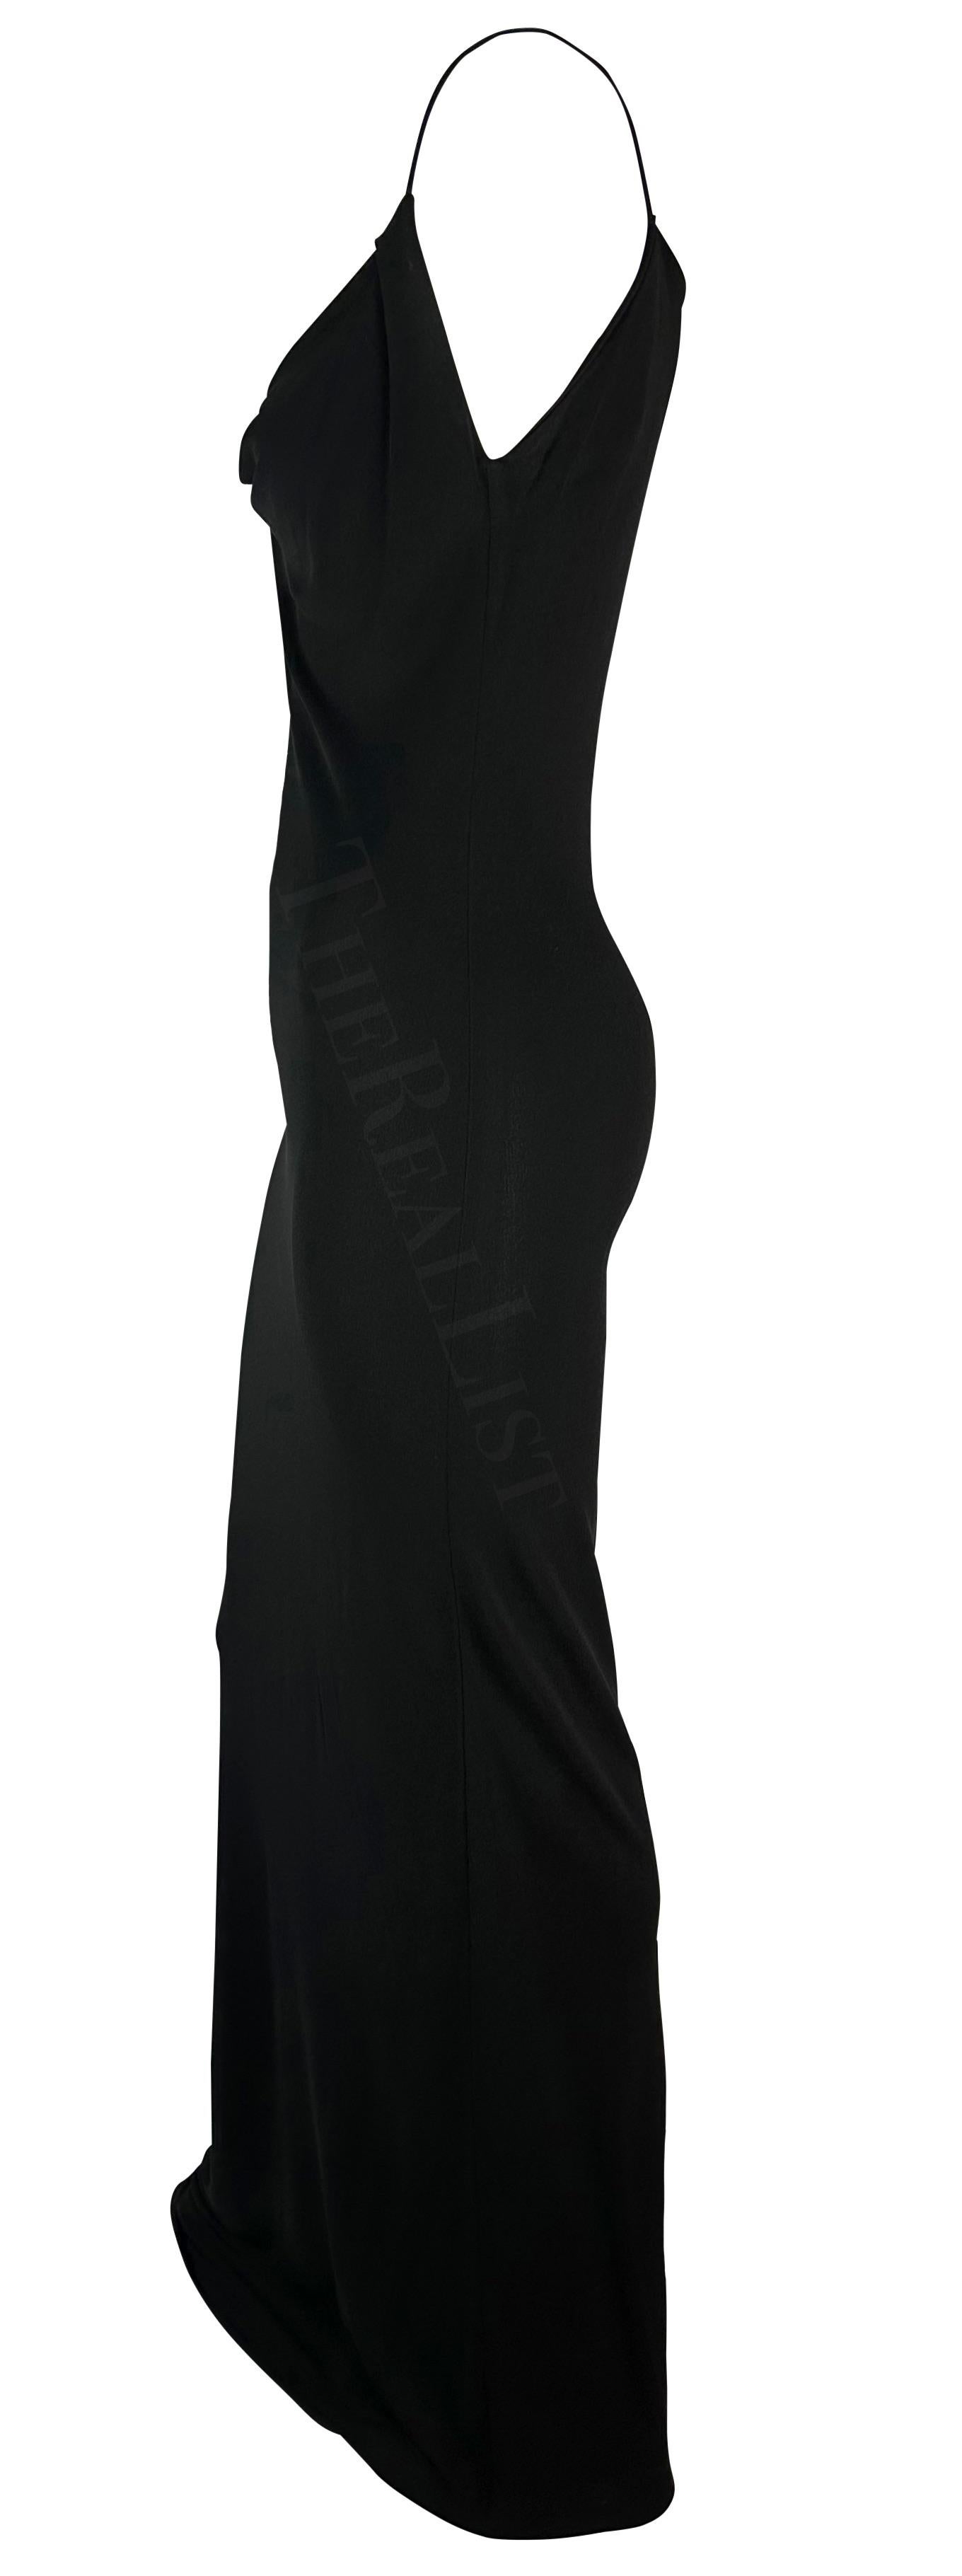 S/S 1997 Gucci by Tom Ford Plunging Cowl Black Slip Bodycon Gown  For Sale 1